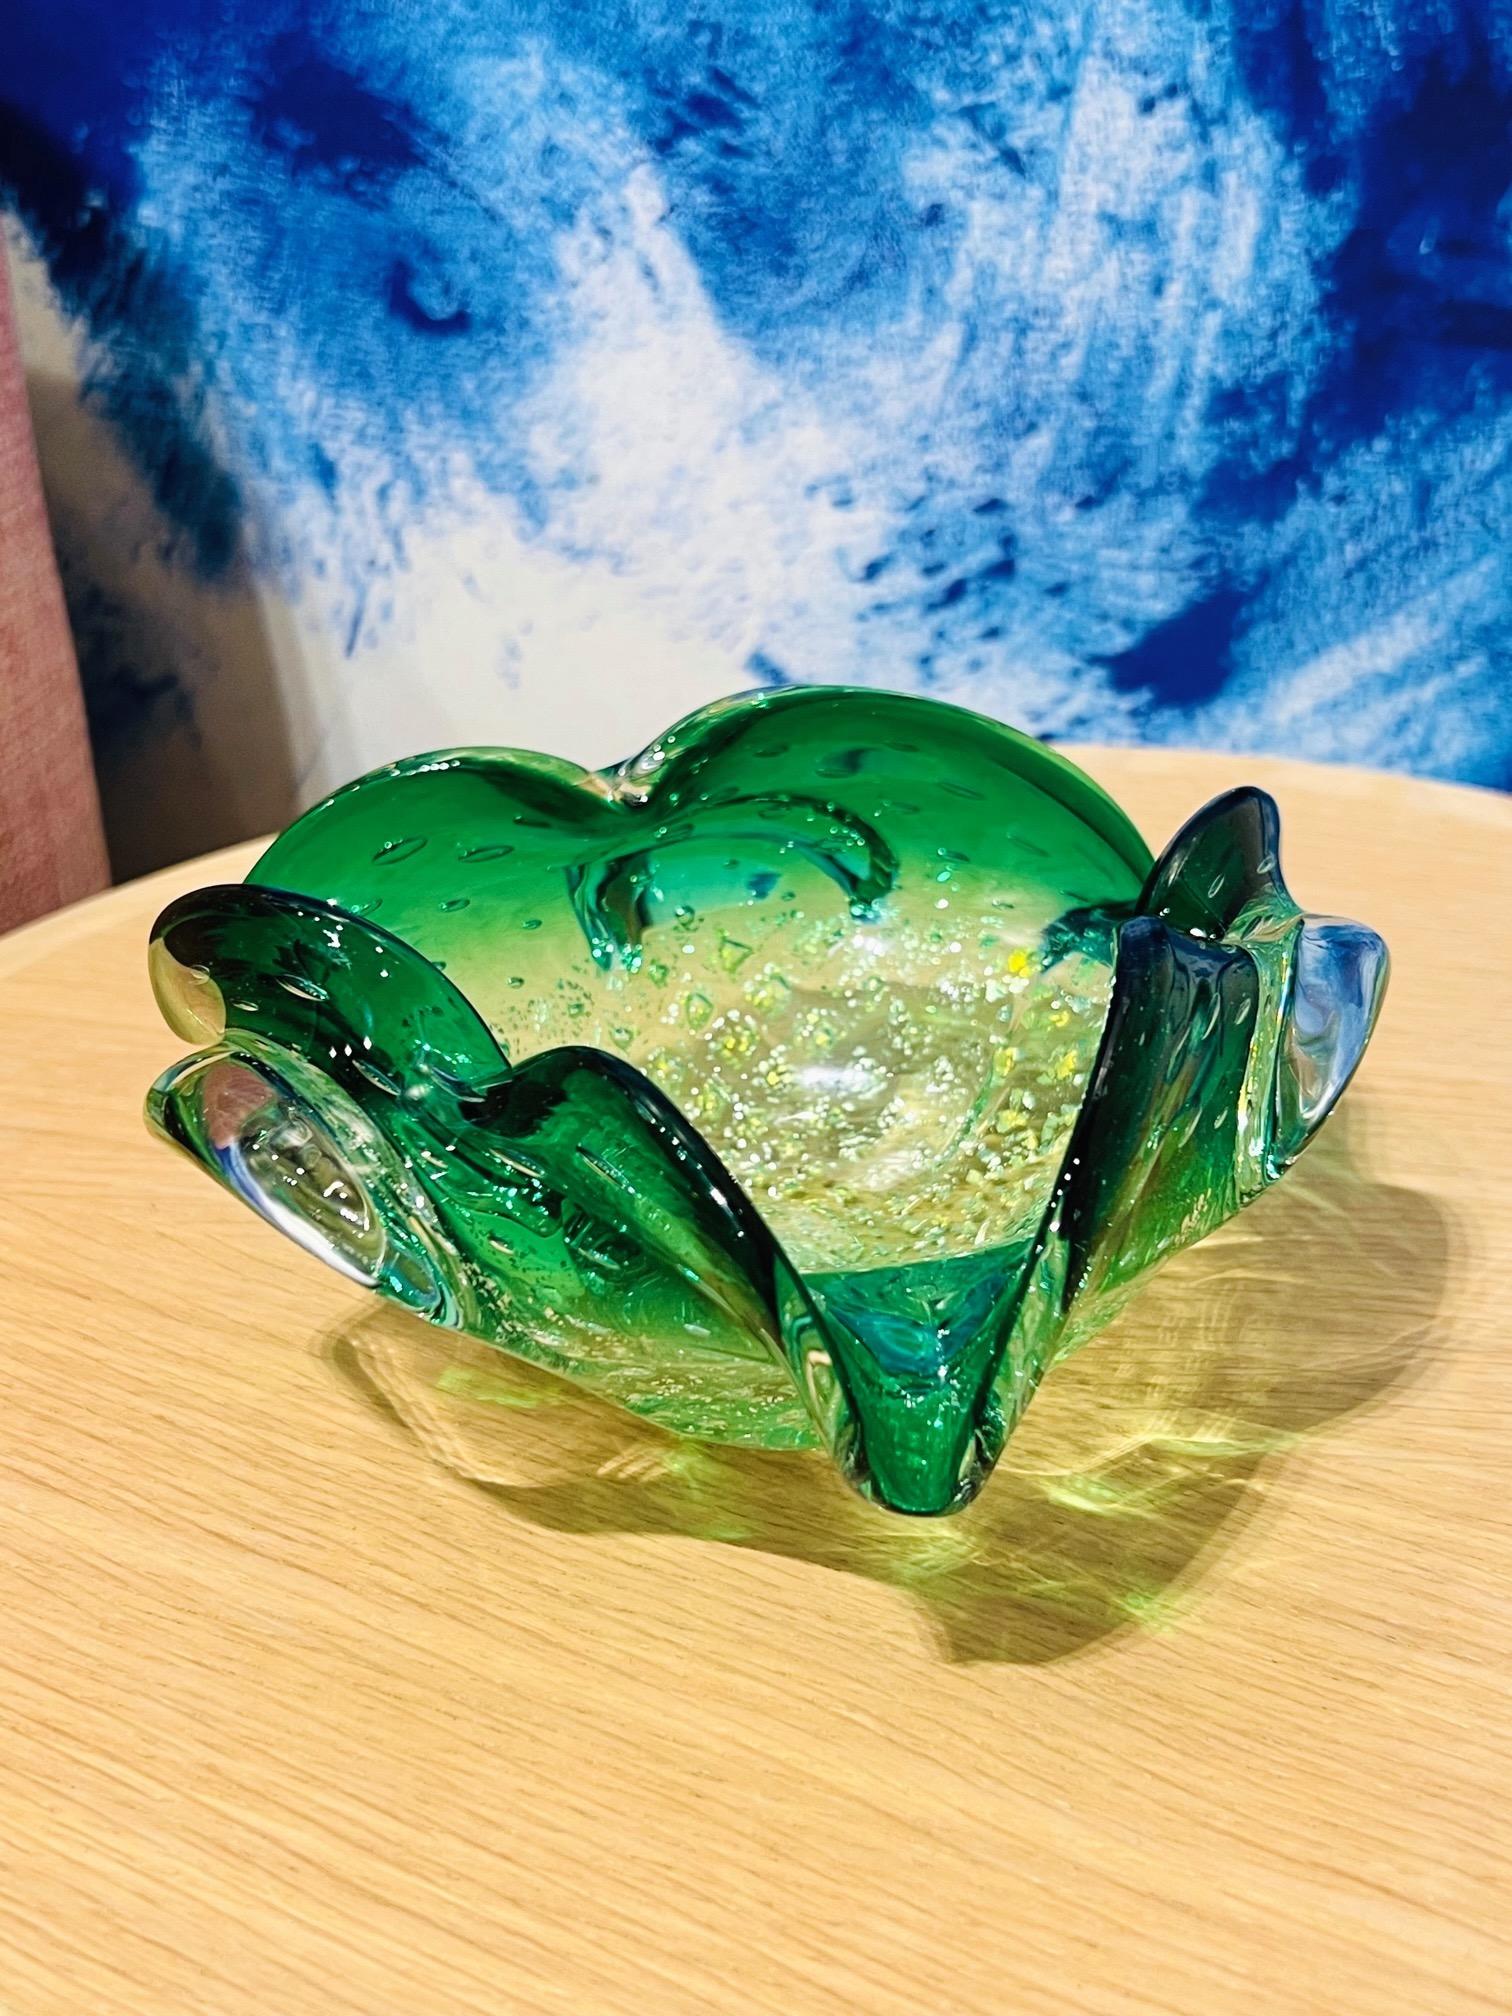 Art Glass Emerald Green Murano Bowl or Ashtray with Gold Leaf Accents, Italy c. 1950s